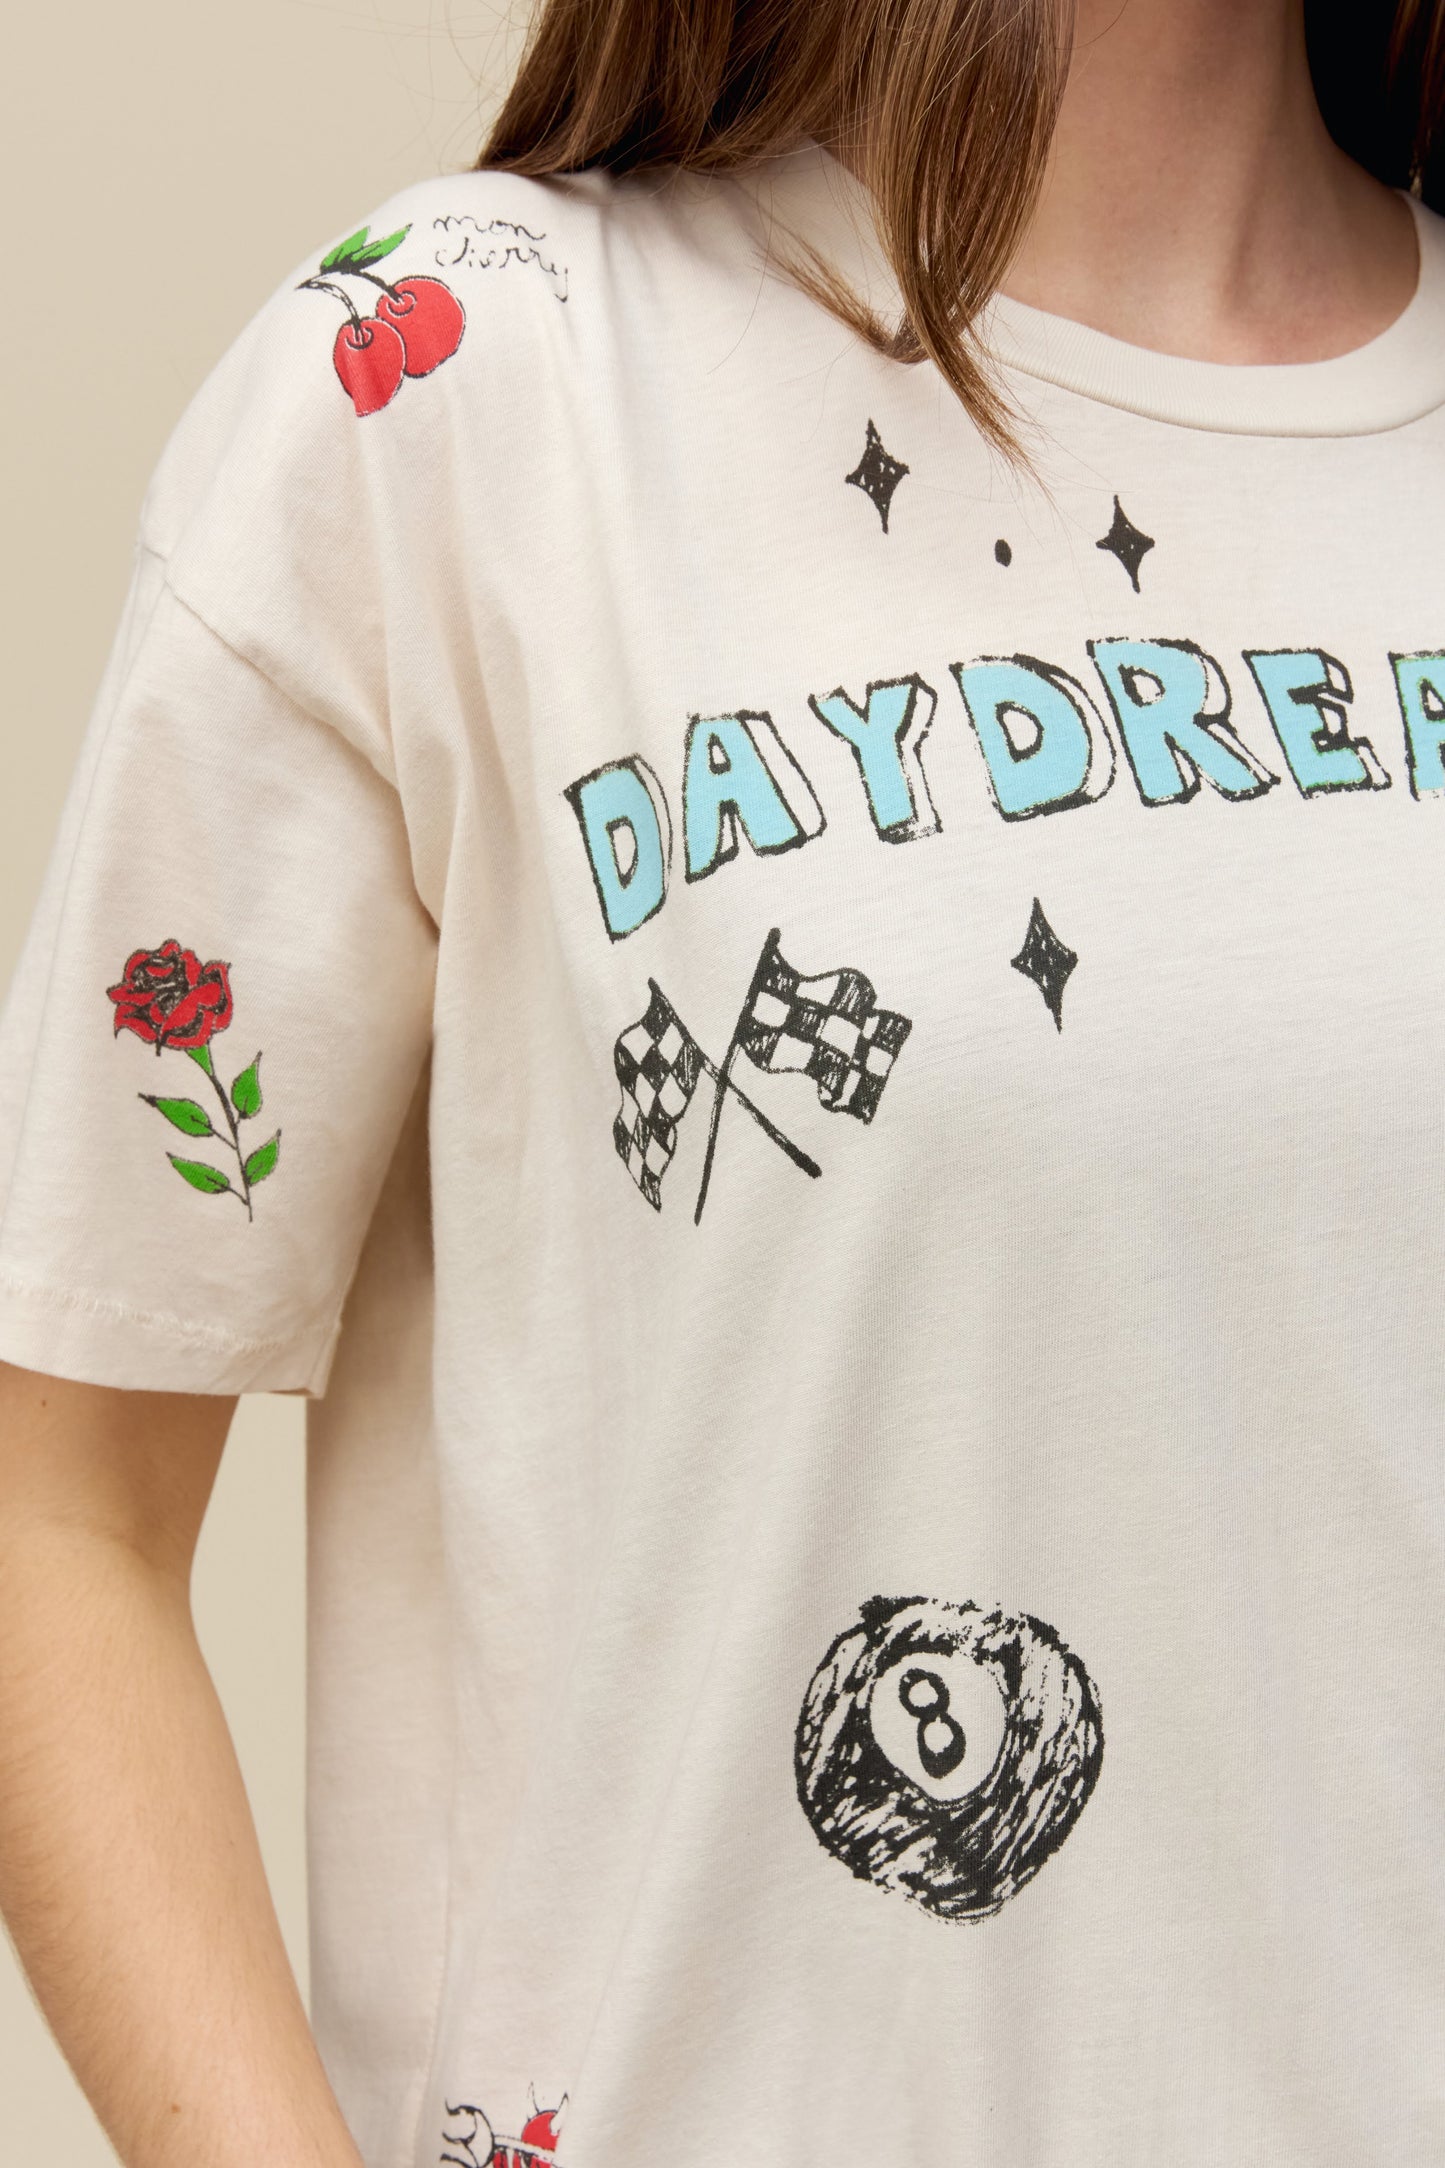 A model featuring a white tee stamped with daydreamer and designed with hand-drawn symbols.